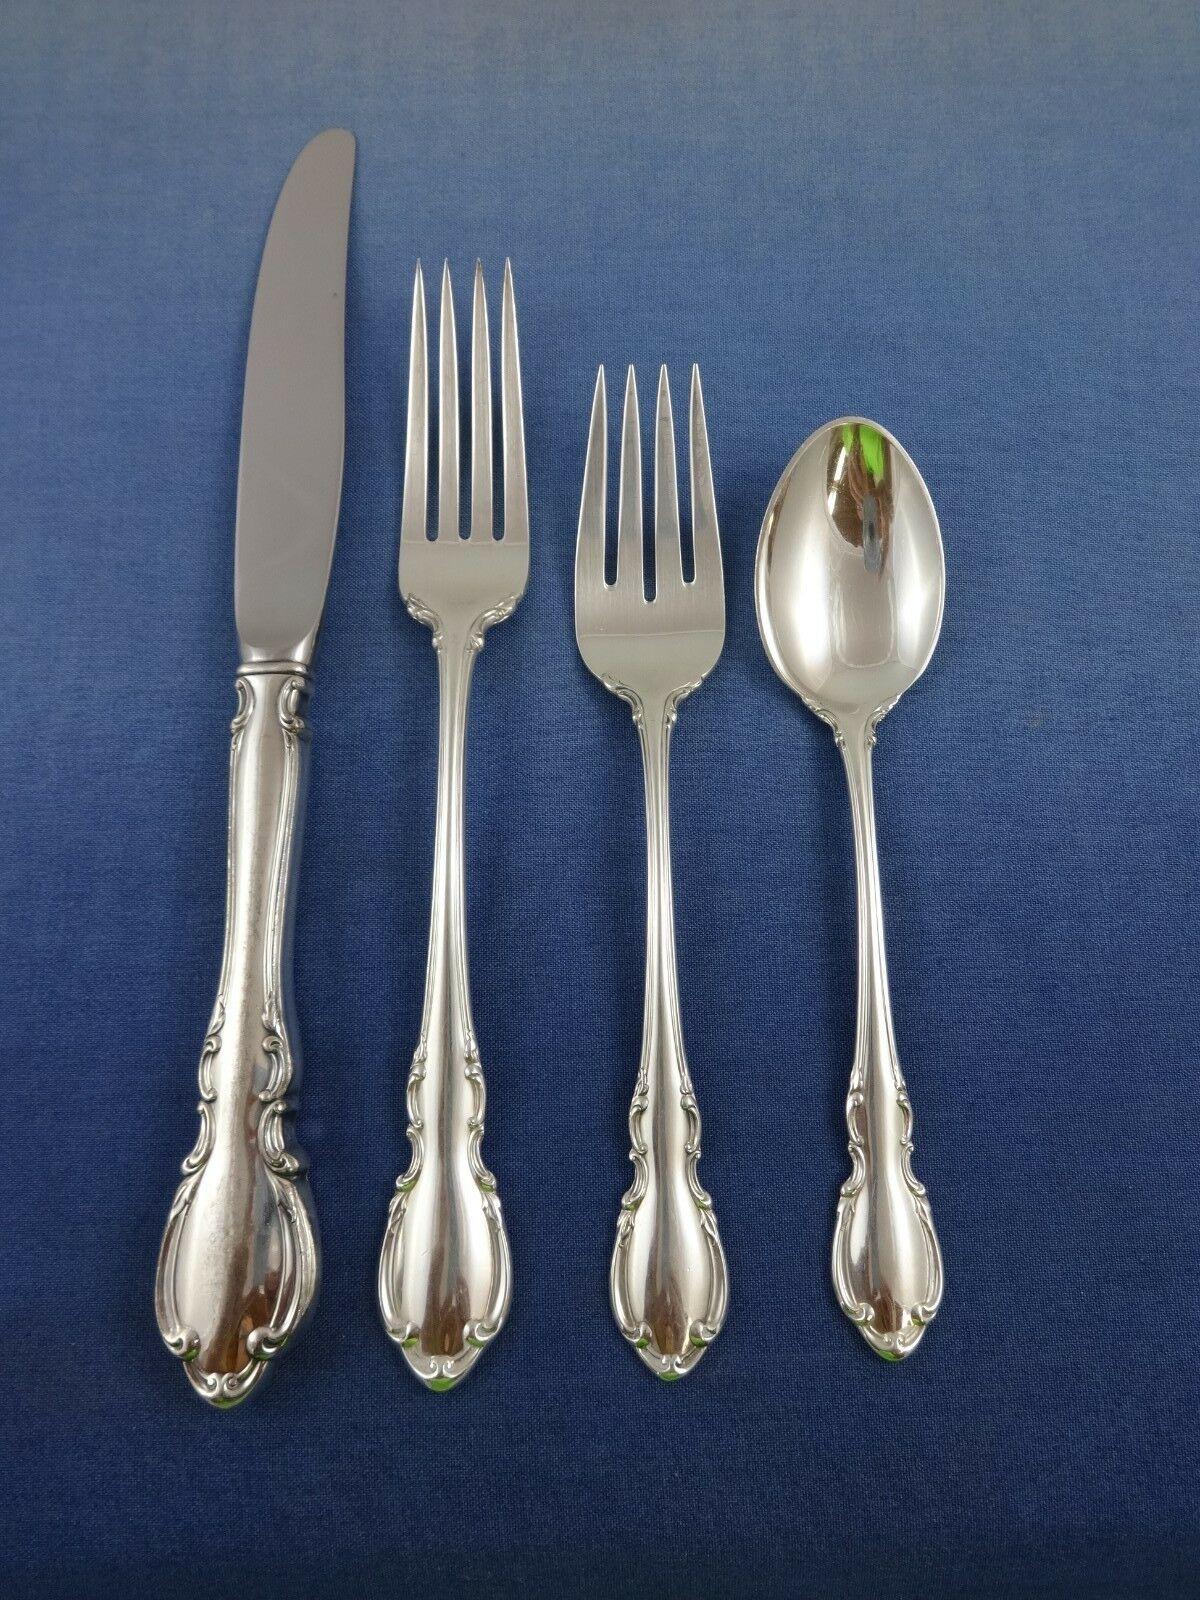 Legato by Towle sterling silver flatware set, 55 pieces. This set includes:

12 knives, 9